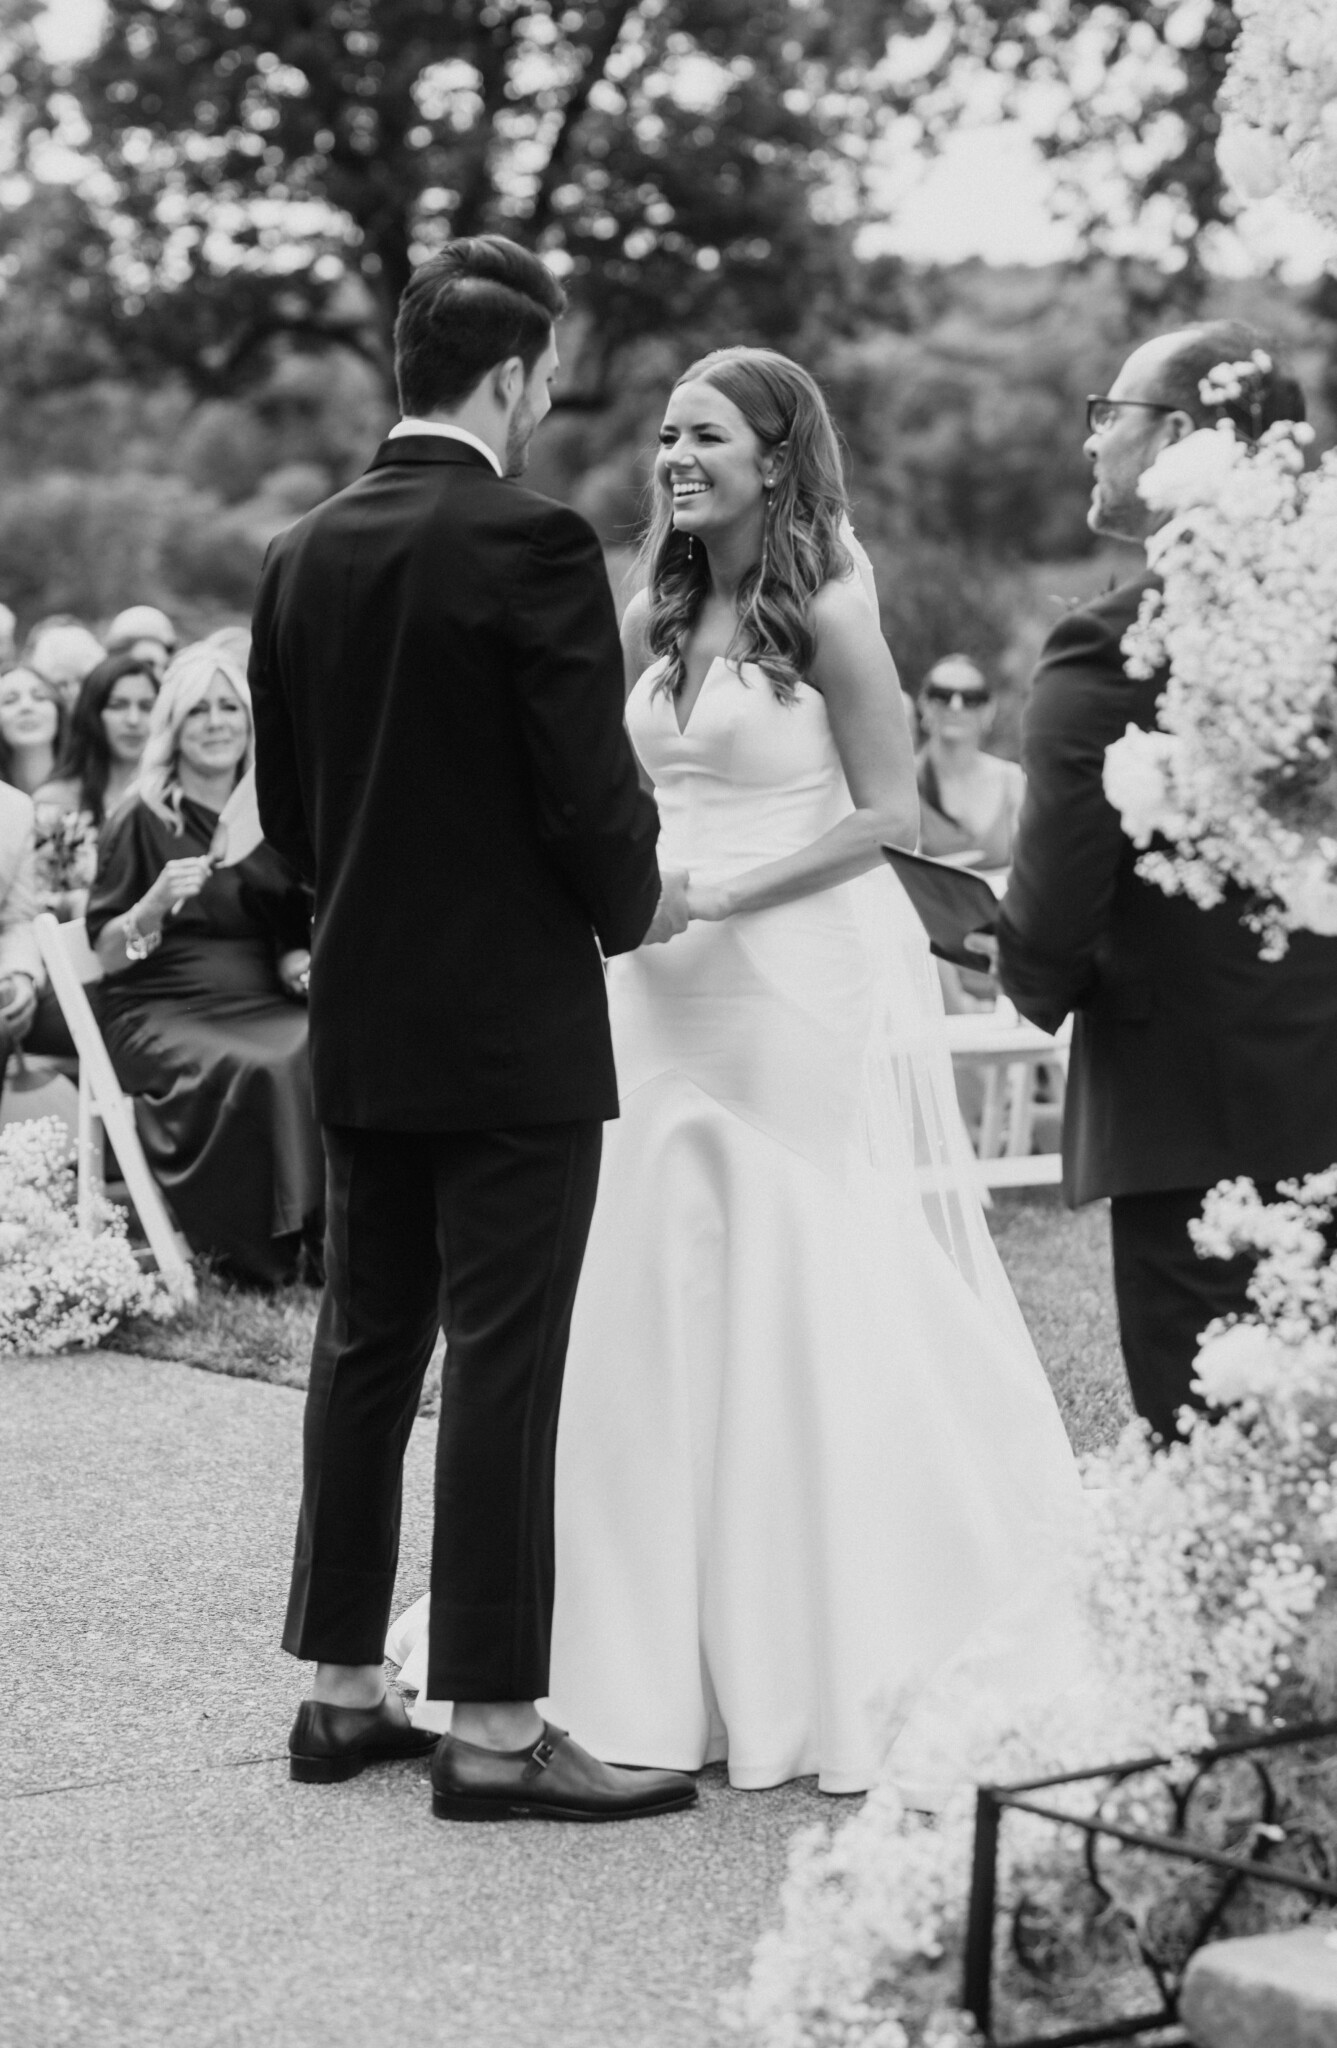 Black and White Outdoor Wedding Ceremony at Ravenswood Mansion